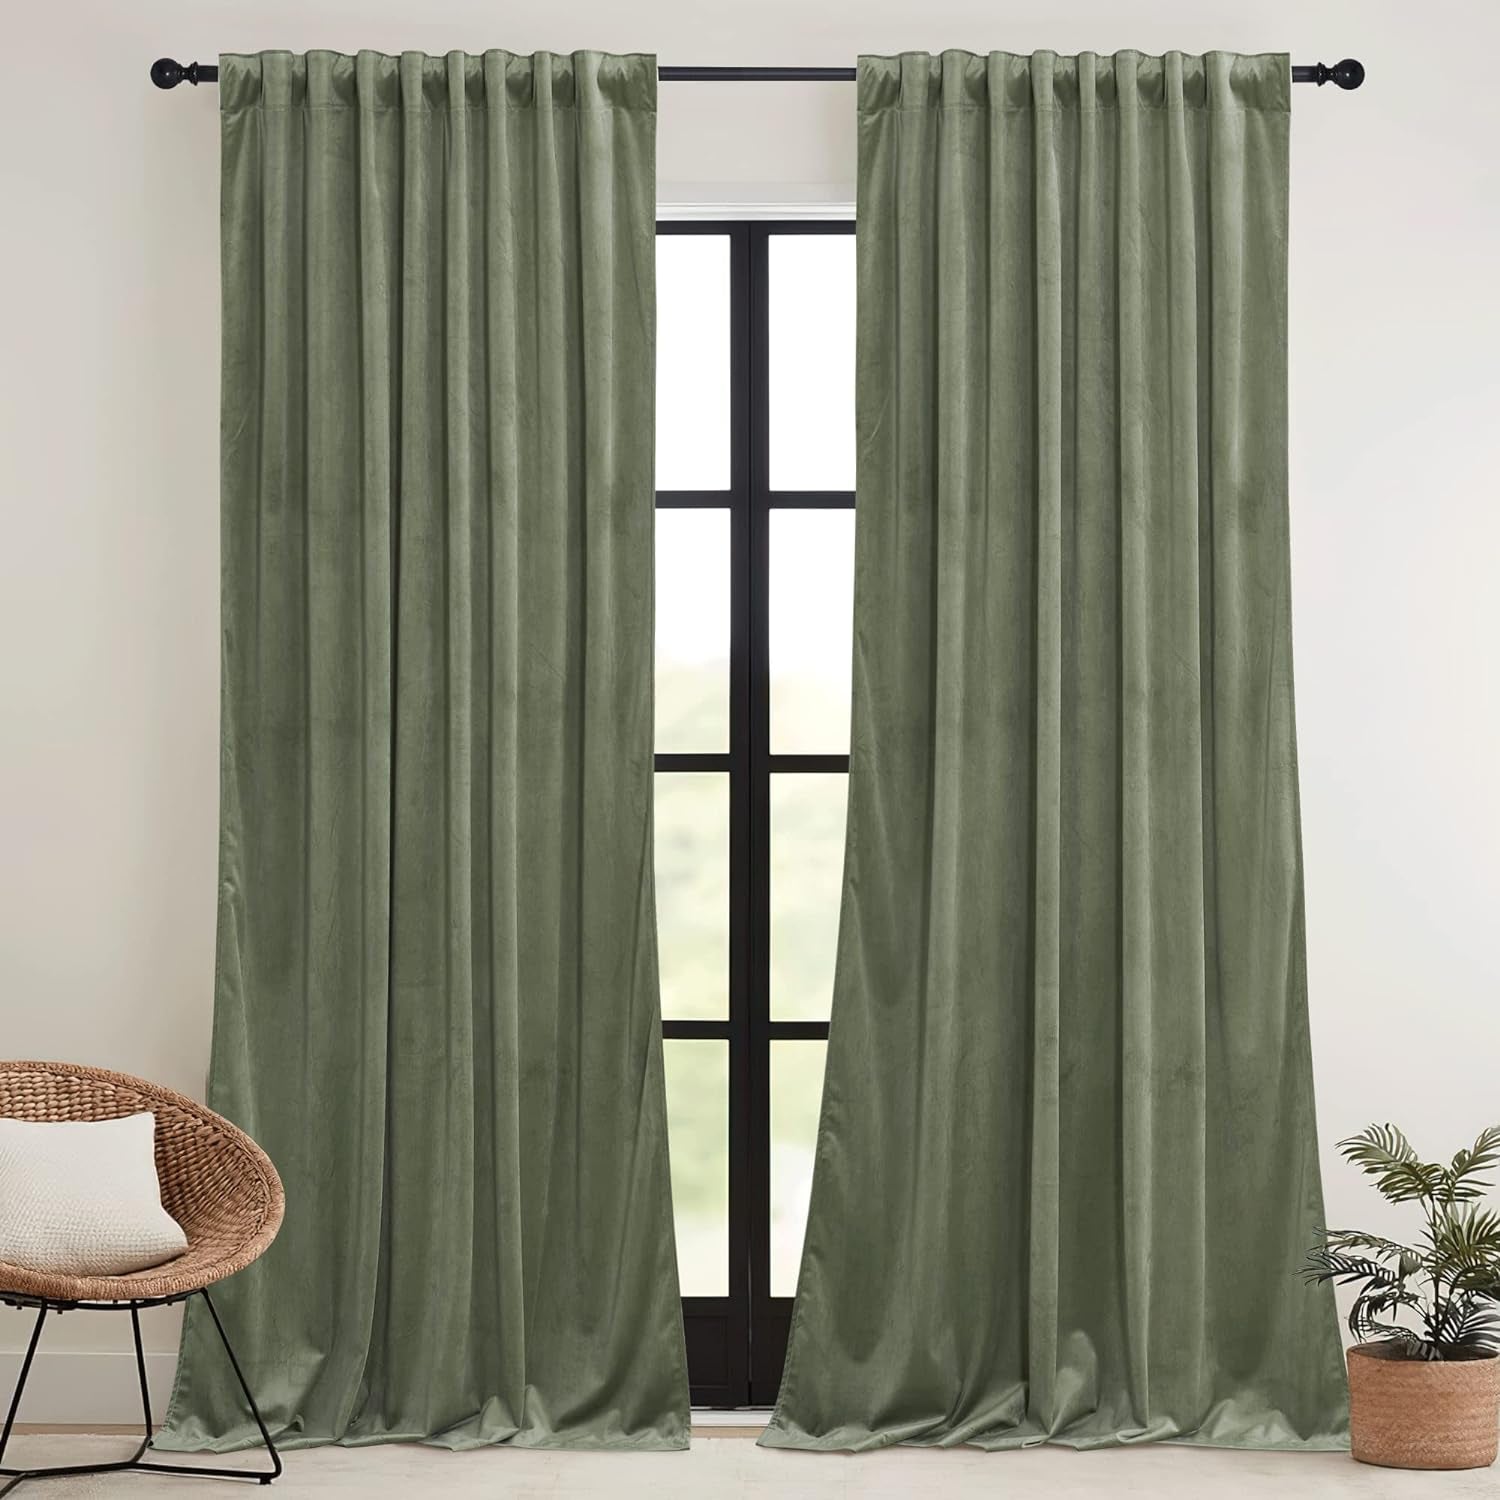 RYB HOME Sage Green Velvet Curtains 108 Inch, Room Darkening Super Soft Velvet Drapes for Living Room Thermal Insulated Pleat Tapes Window Treatment for Bedroom Playroom, W52 X L108 Inch, 2 Panels  RYB HOME   